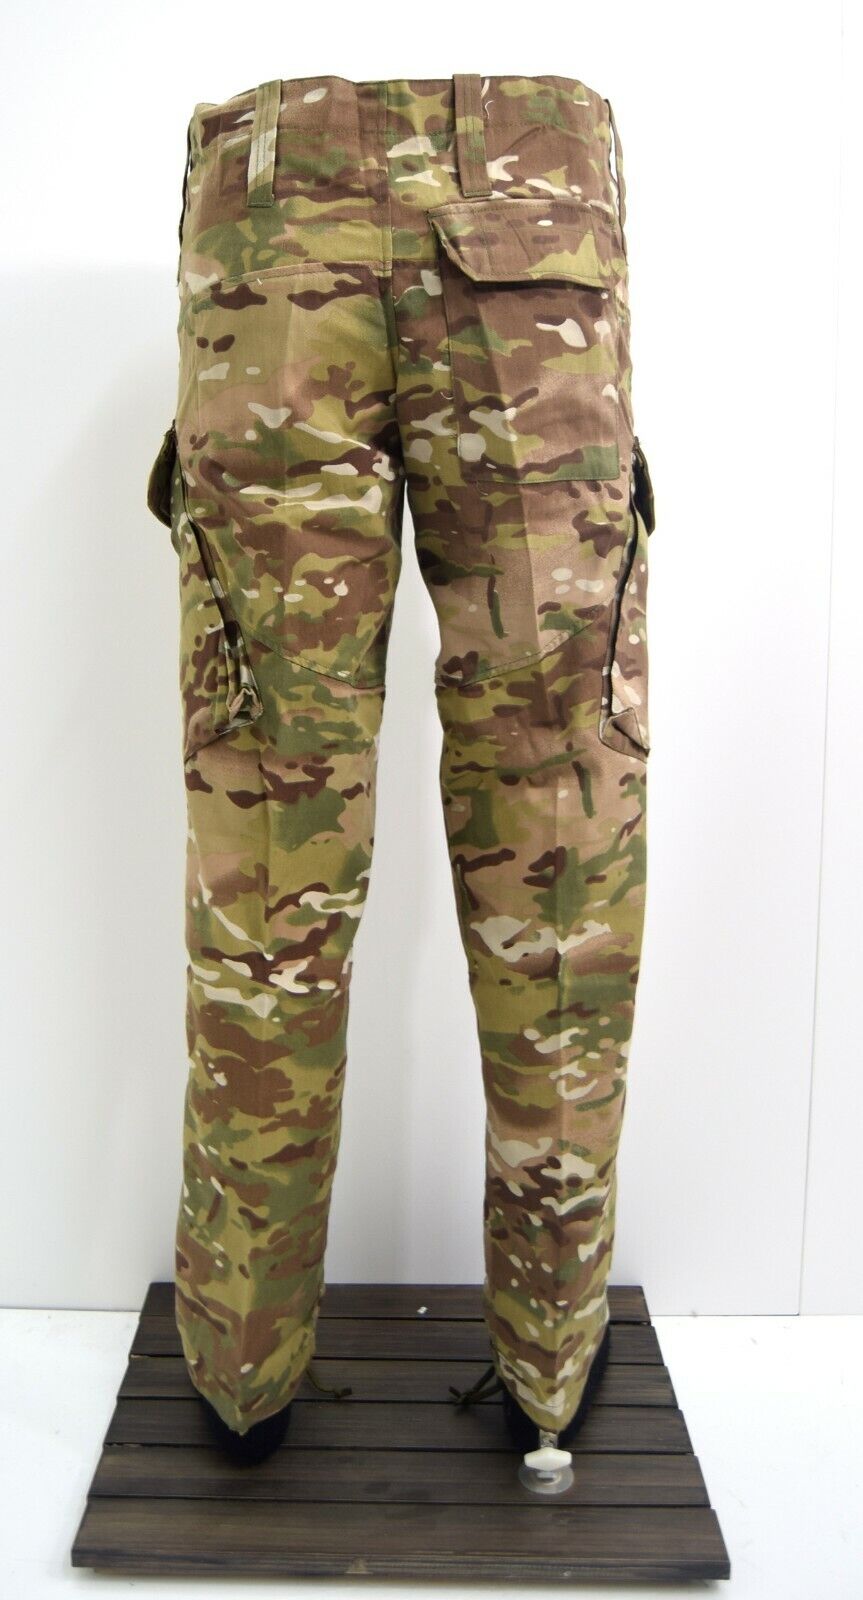 Brand New MTP Trousers British Army Issue MULTICAM PCS Pants Combat Military